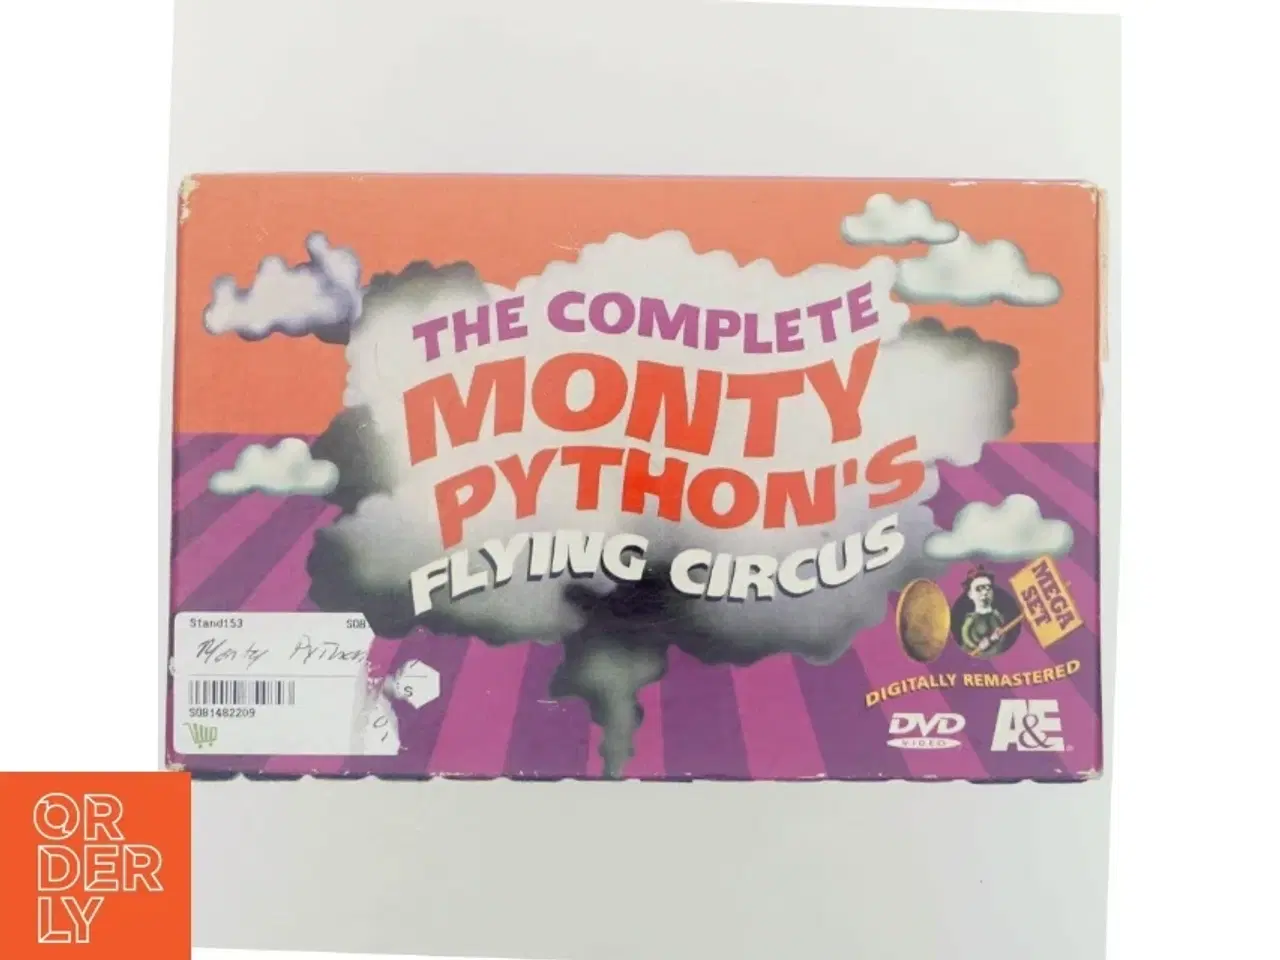 Billede 3 - The complete Monty Python´s flying circus